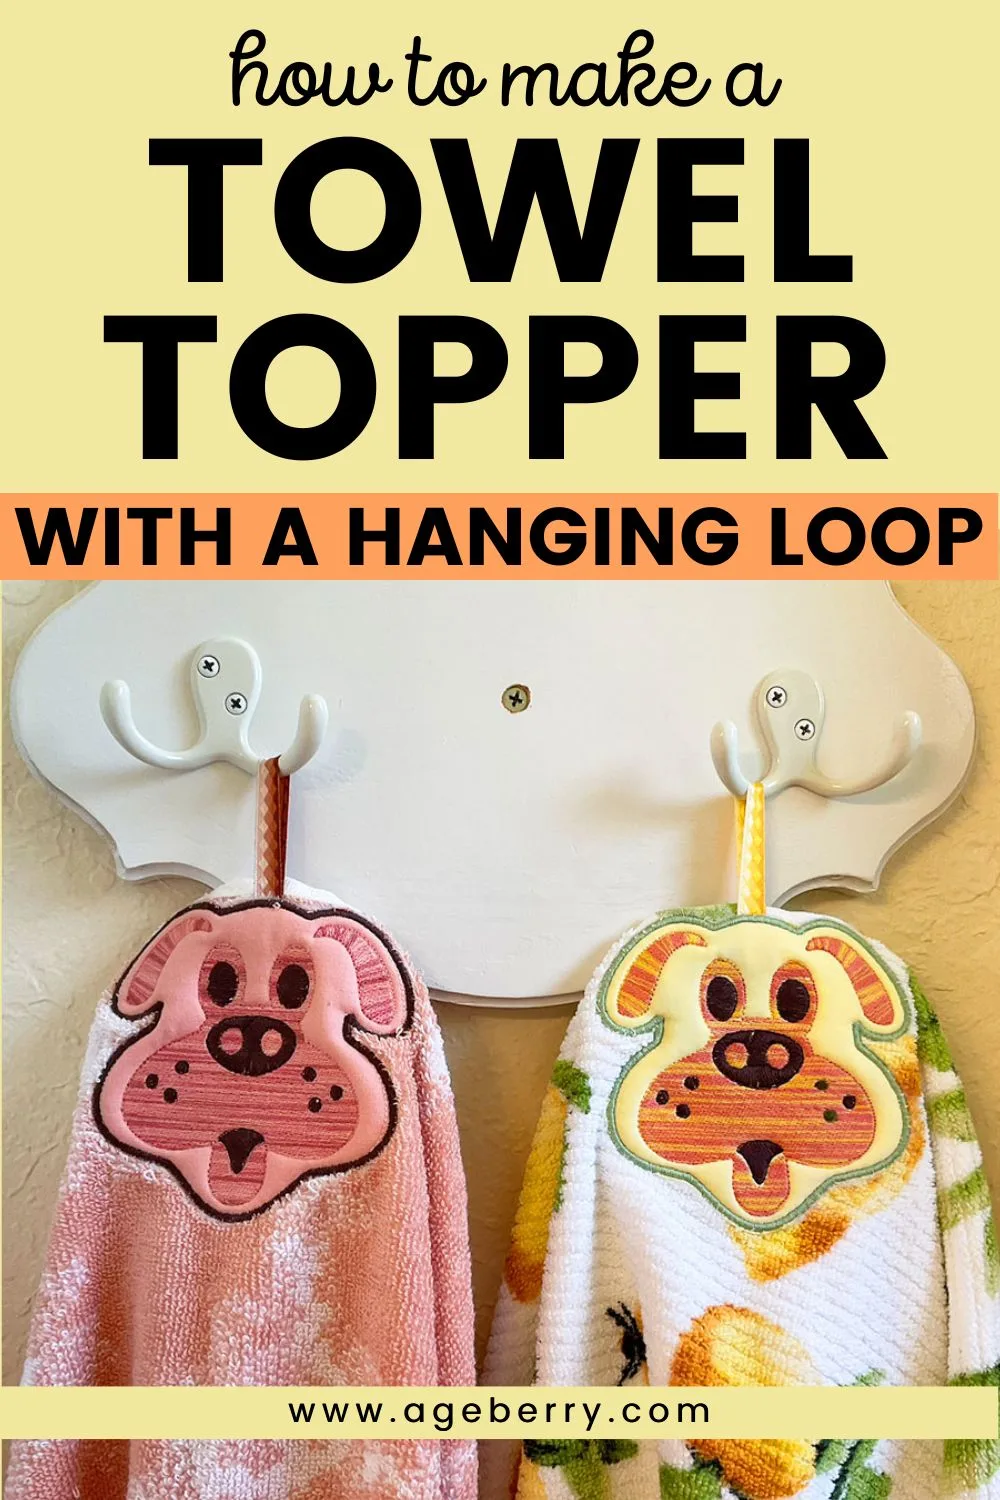 https://www.ageberry.com/wp-content/uploads/2023/09/How-to-make-in-the-hoop-towel-topper-with-a-hanging-loop-2.jpg.webp